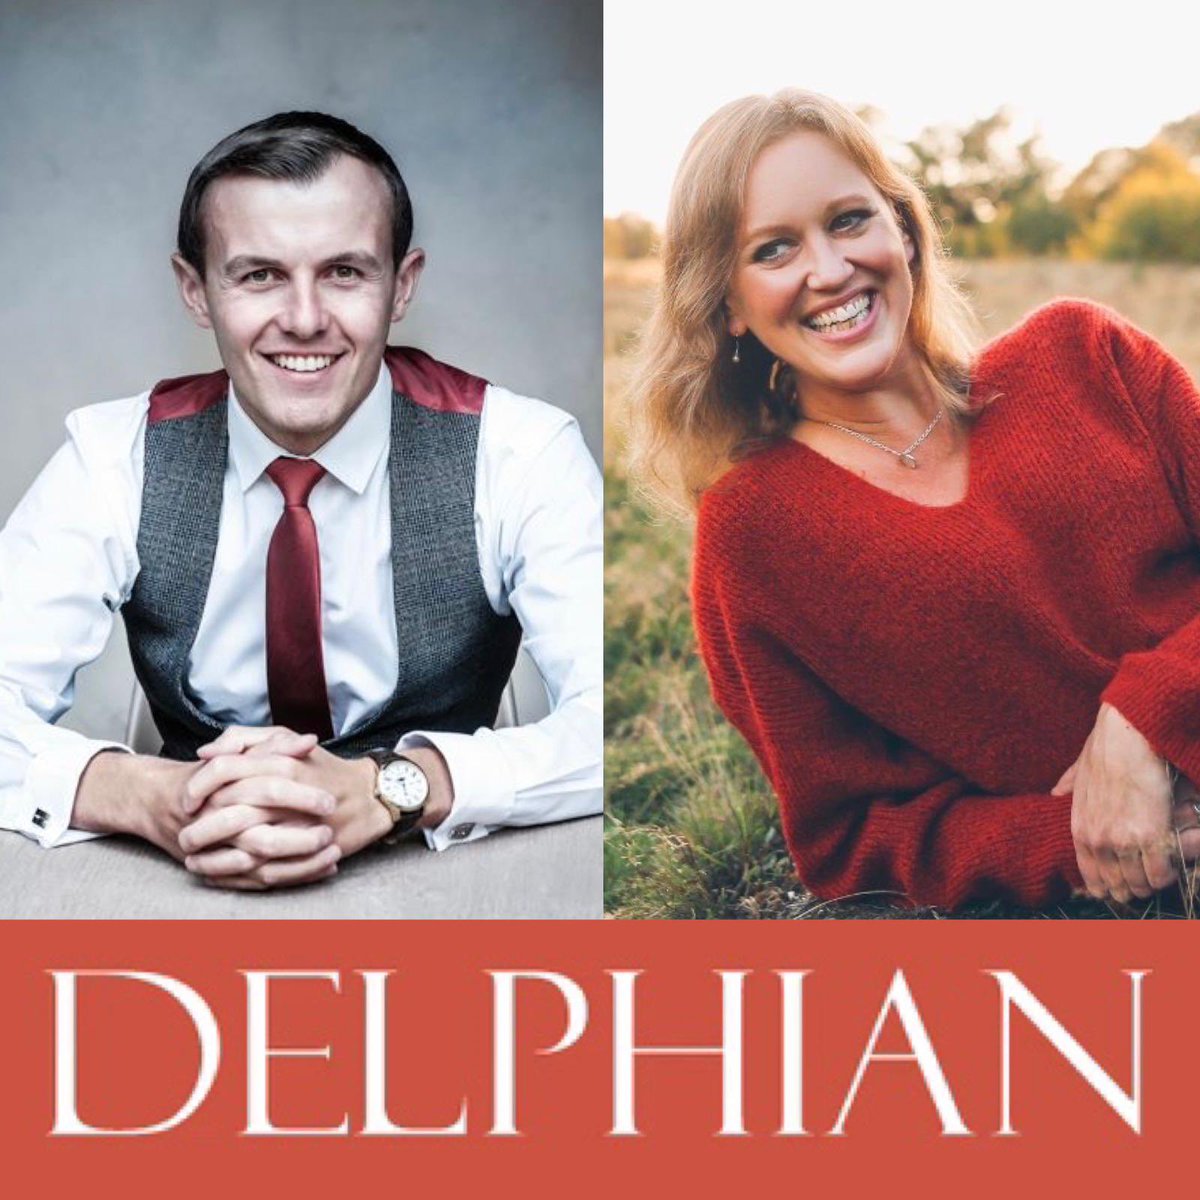 Announcement 📣 I am very excited to be heading back to the UK to record my DEBUT SONG ALBUM with my incredibly talented friend @AnnaTilbrook and I’m really looking forward to working with the wonderful team @delphianrecords